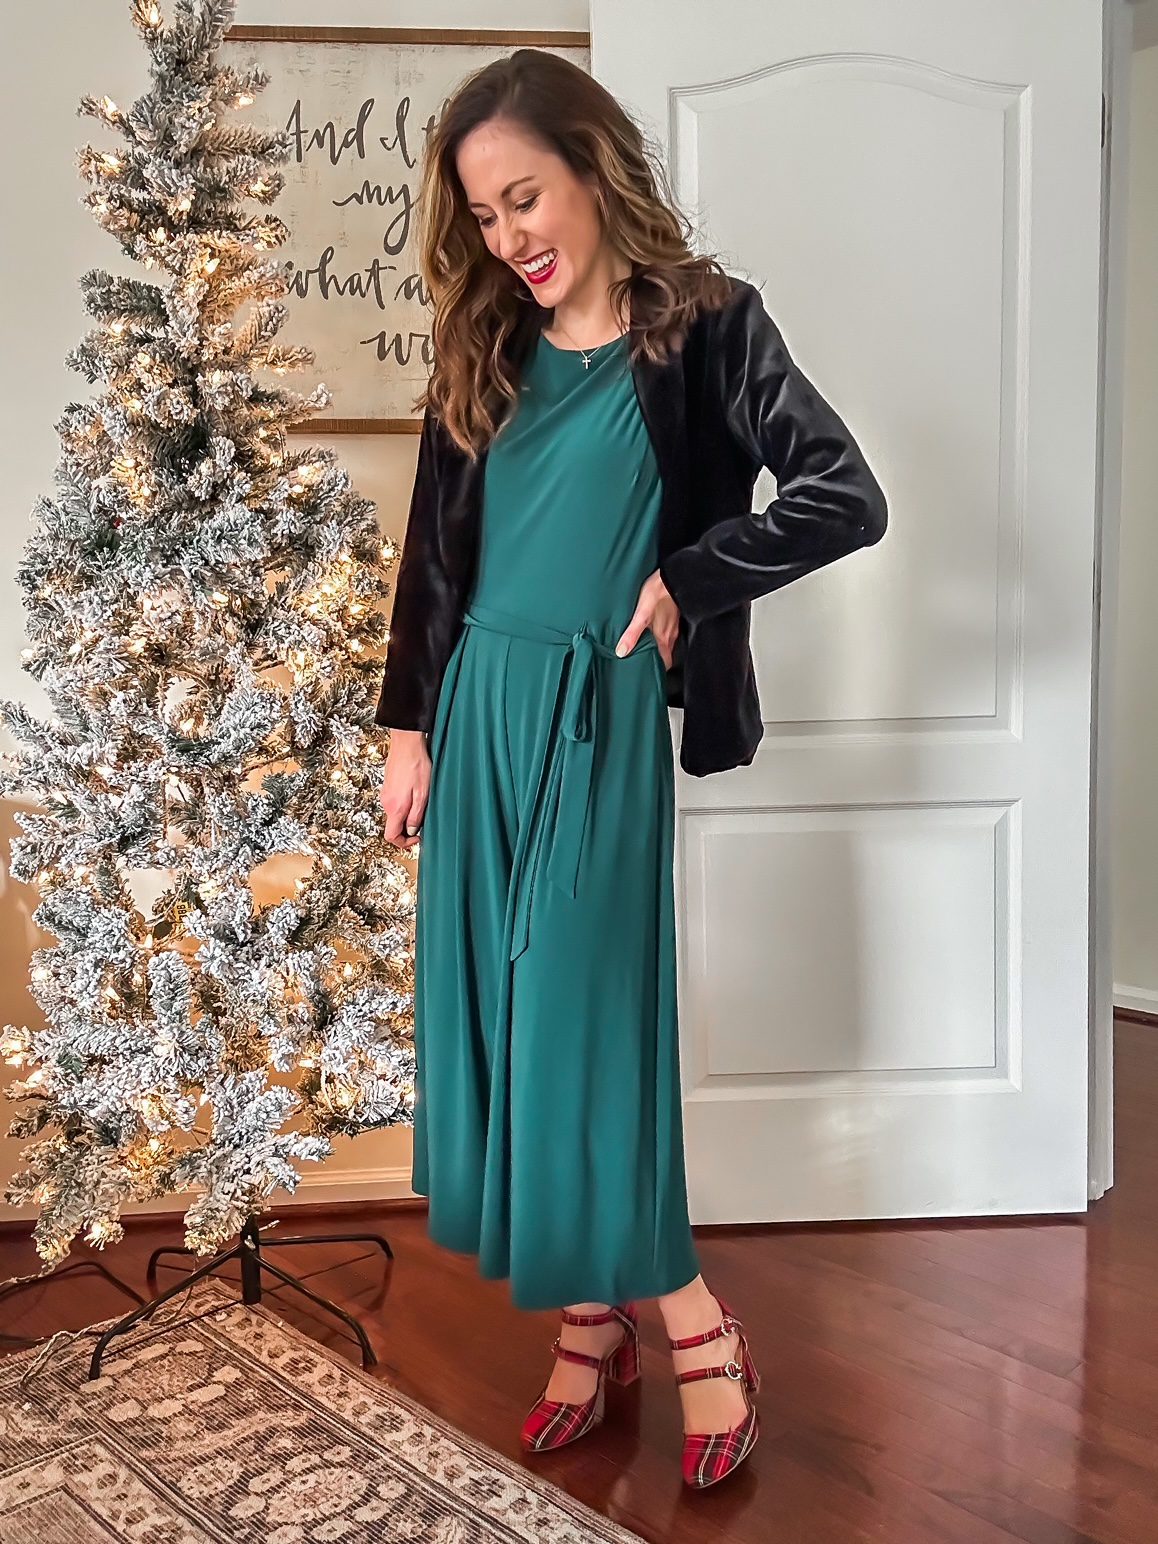 Festive Holiday Outfit Ideas - on Coming Up Roses